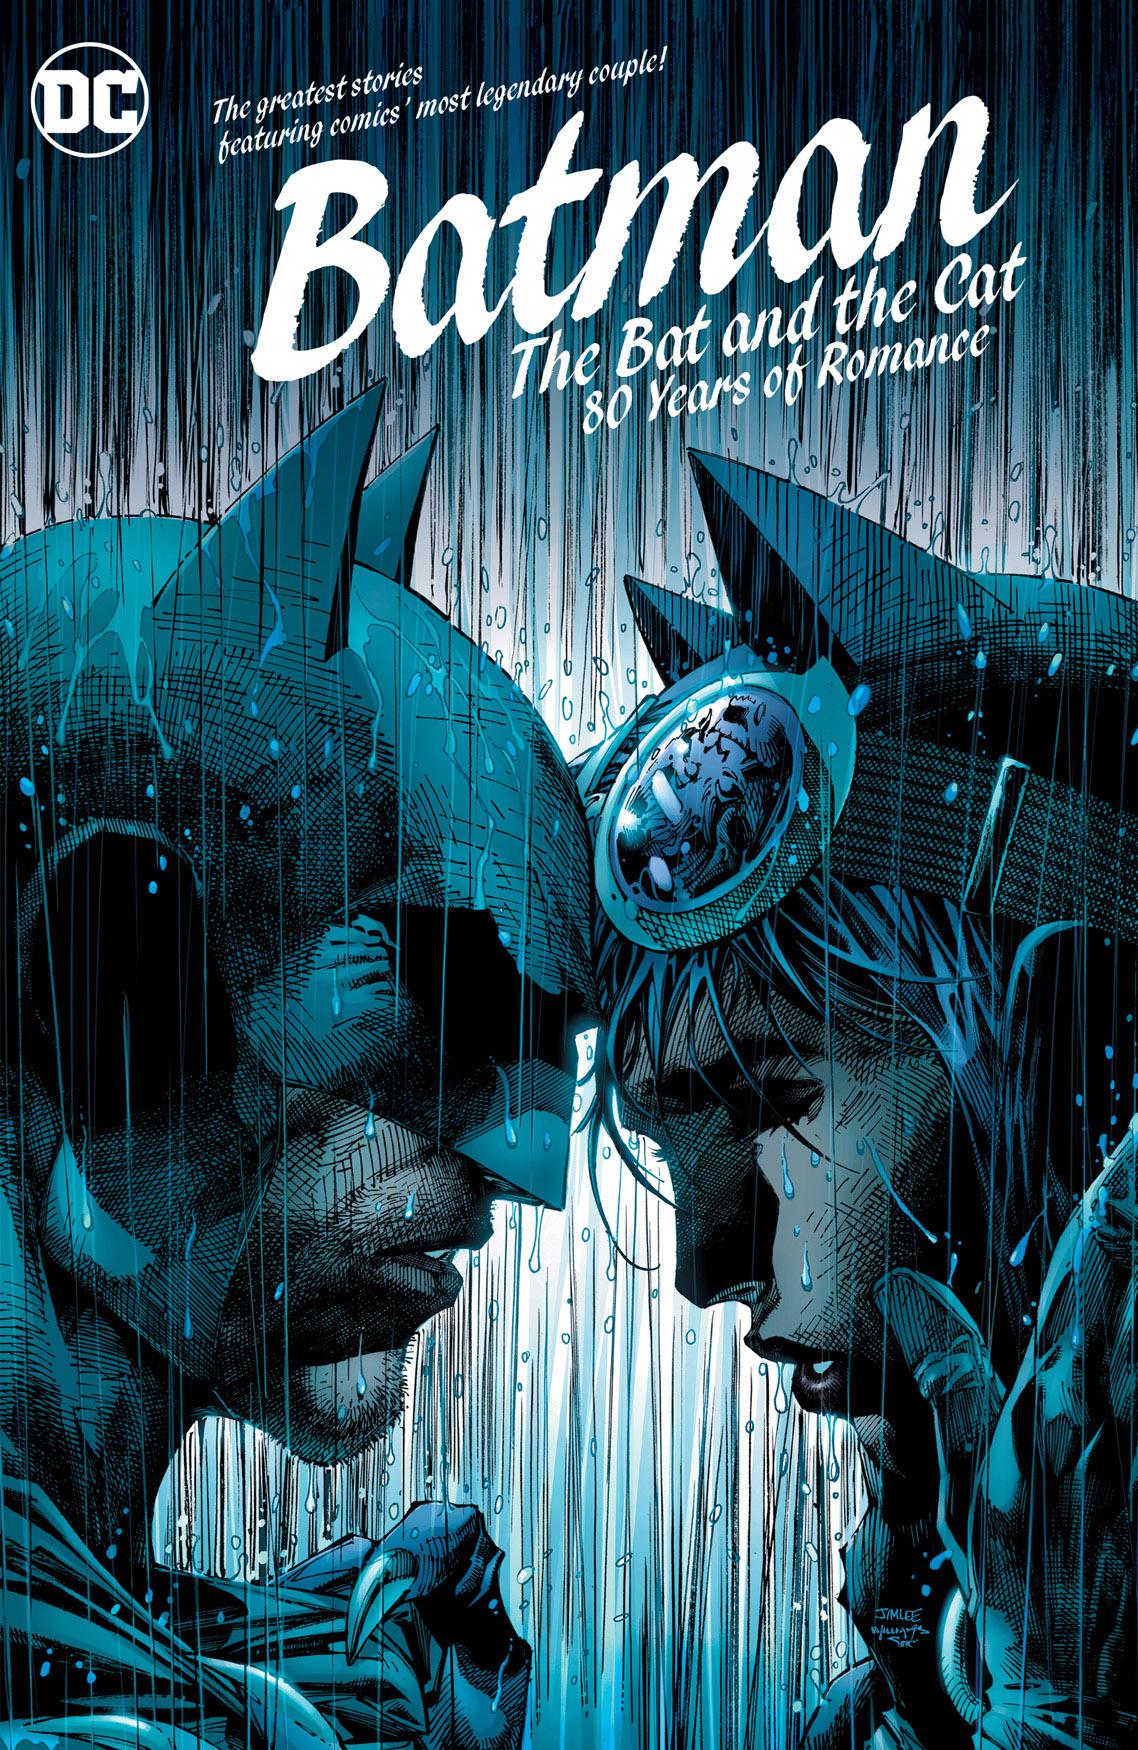 Read online Batman: The Bat and the Cat: 80 Years of Romance comic -  Issue # TPB (Part 1) - 1